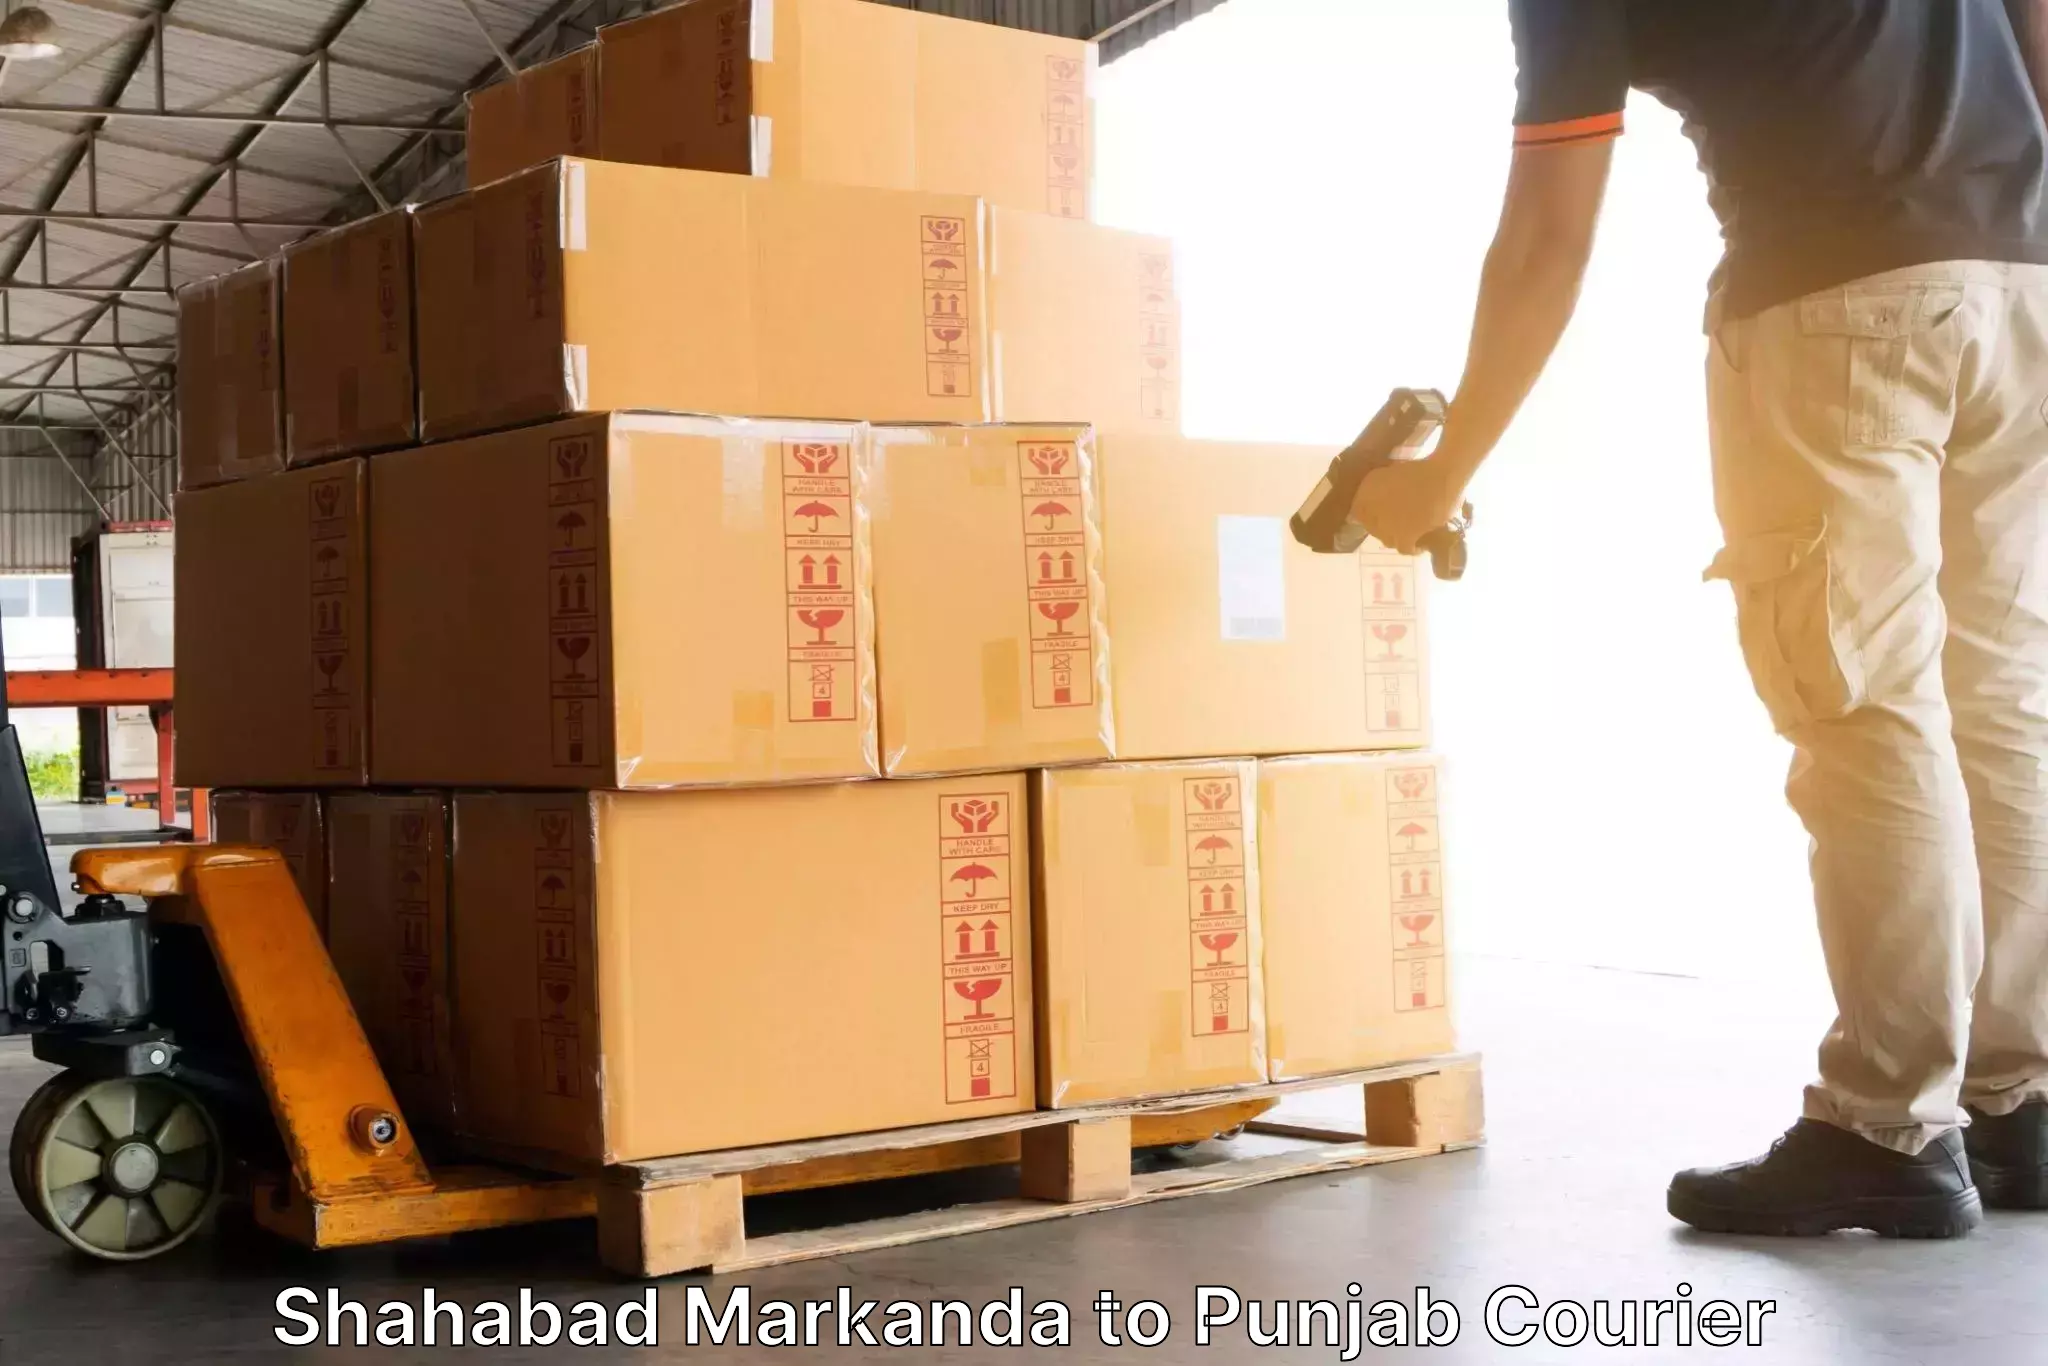 Expedited shipping methods Shahabad Markanda to Thapar Institute of Engineering and Technology Patiala